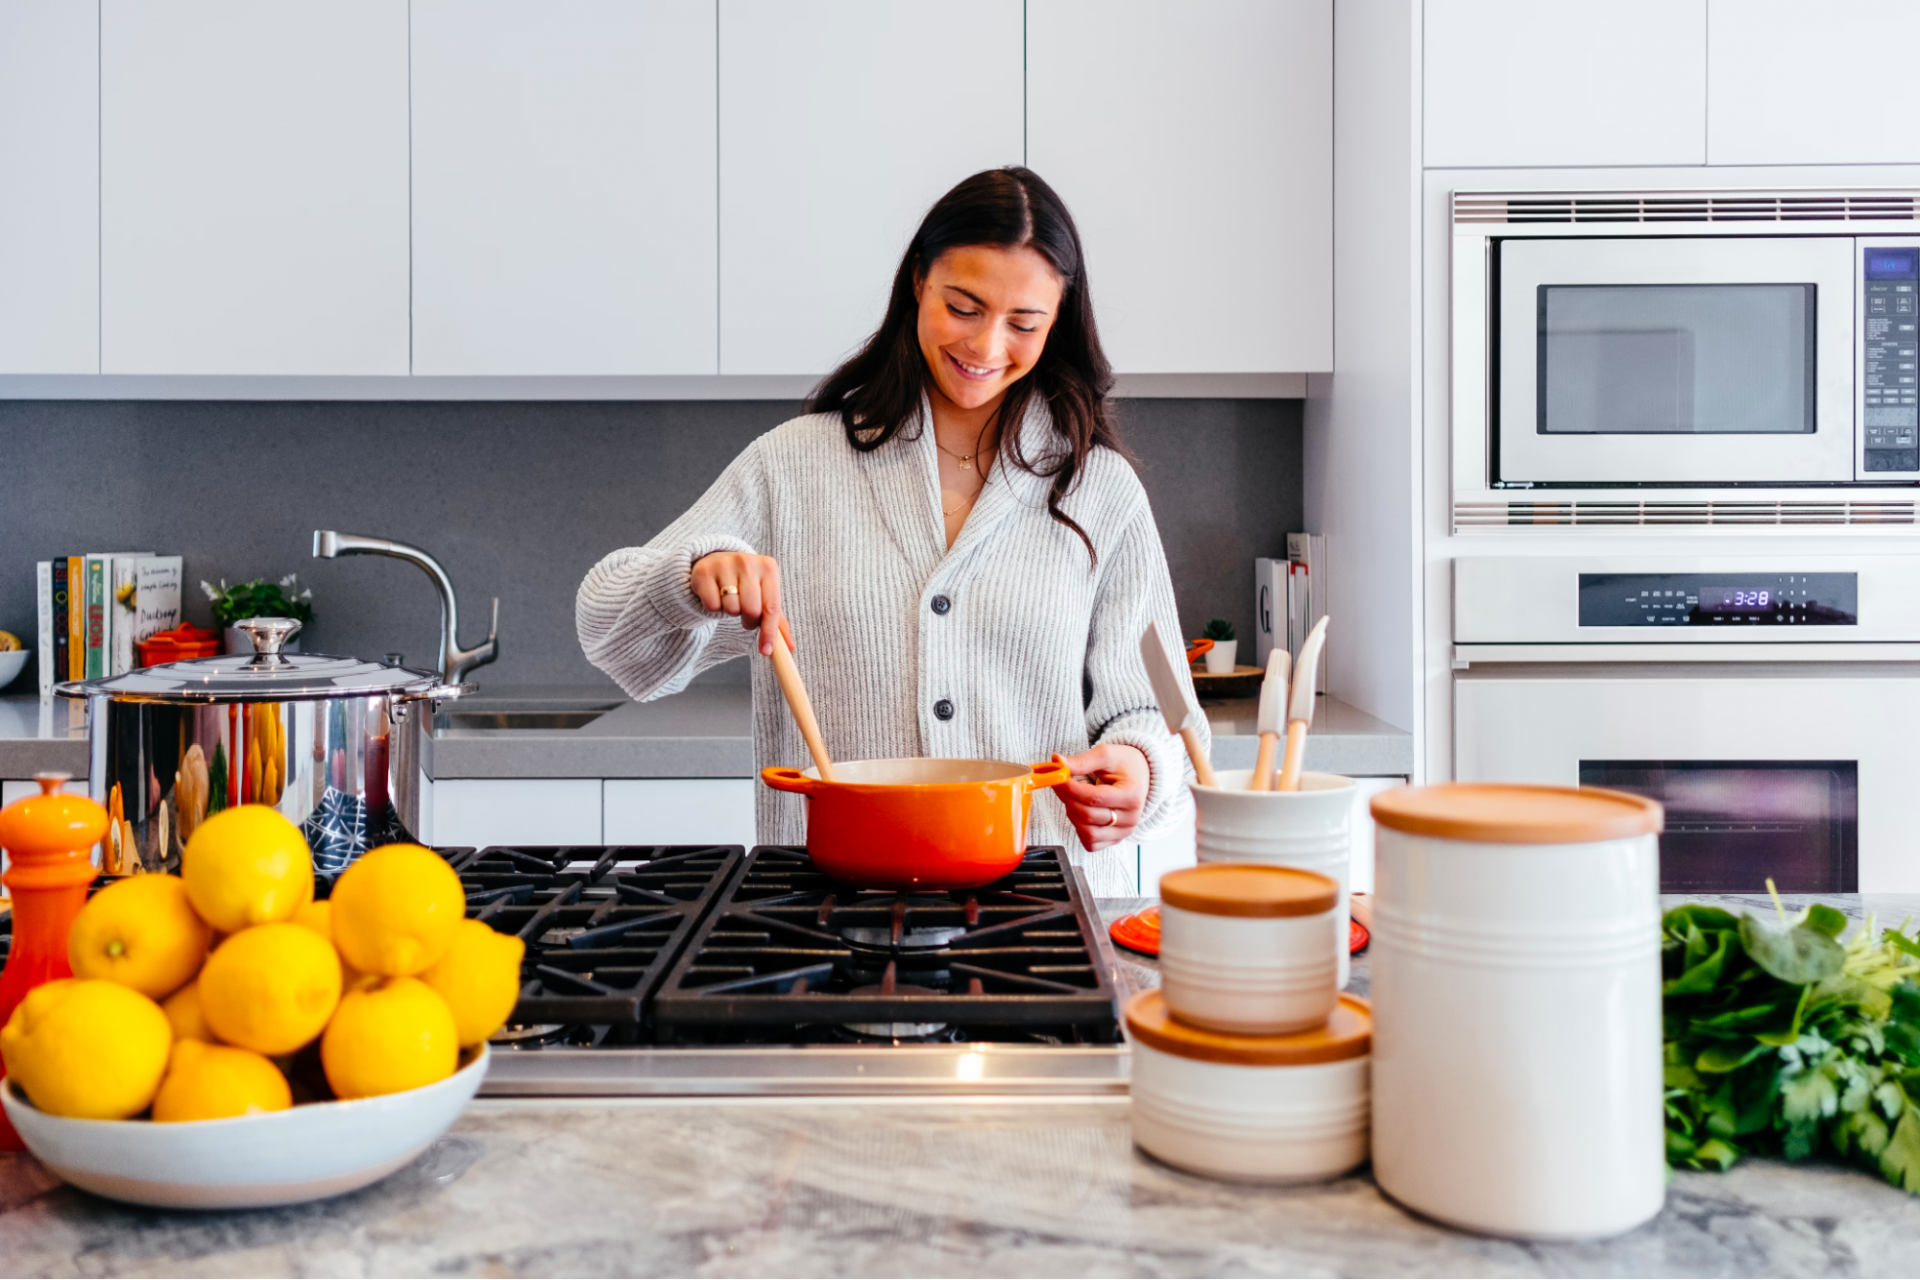 how to start a food business from home - setting up your kitchen